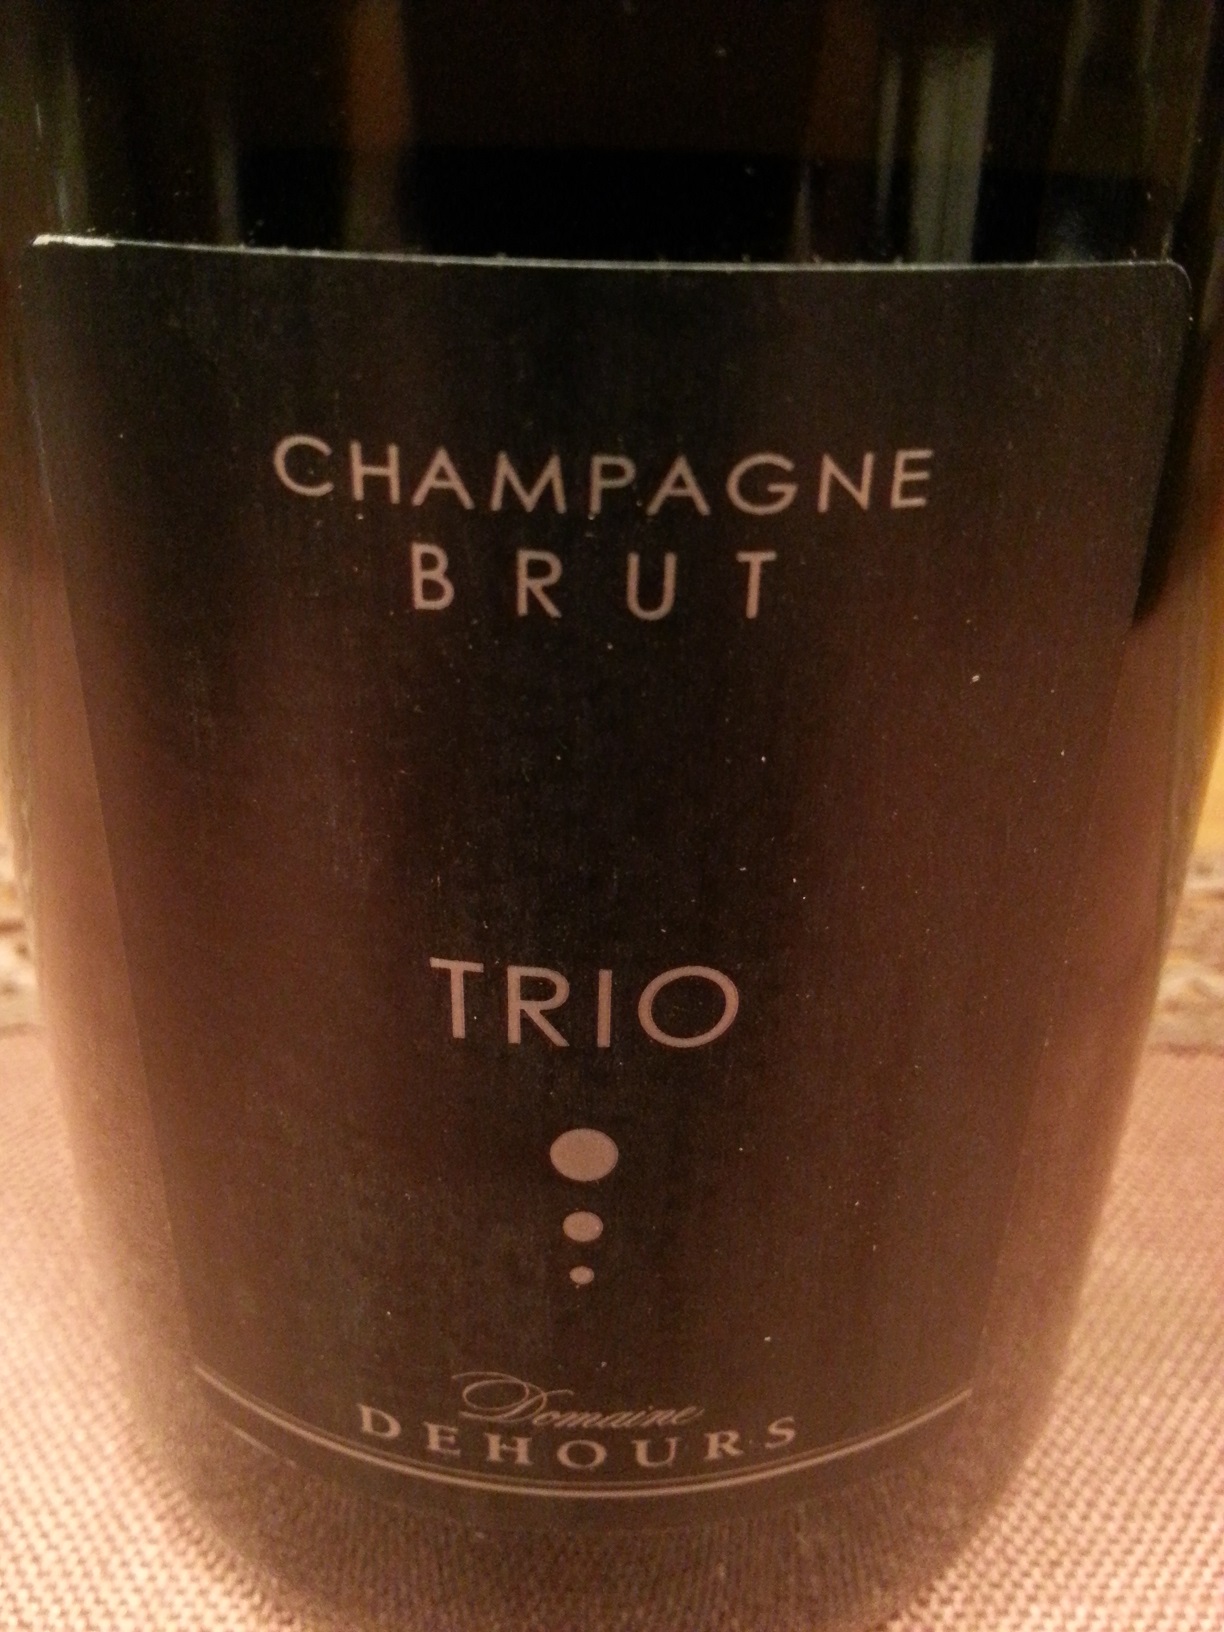 2008 Champagne Trio S Extra Brut | Dehours